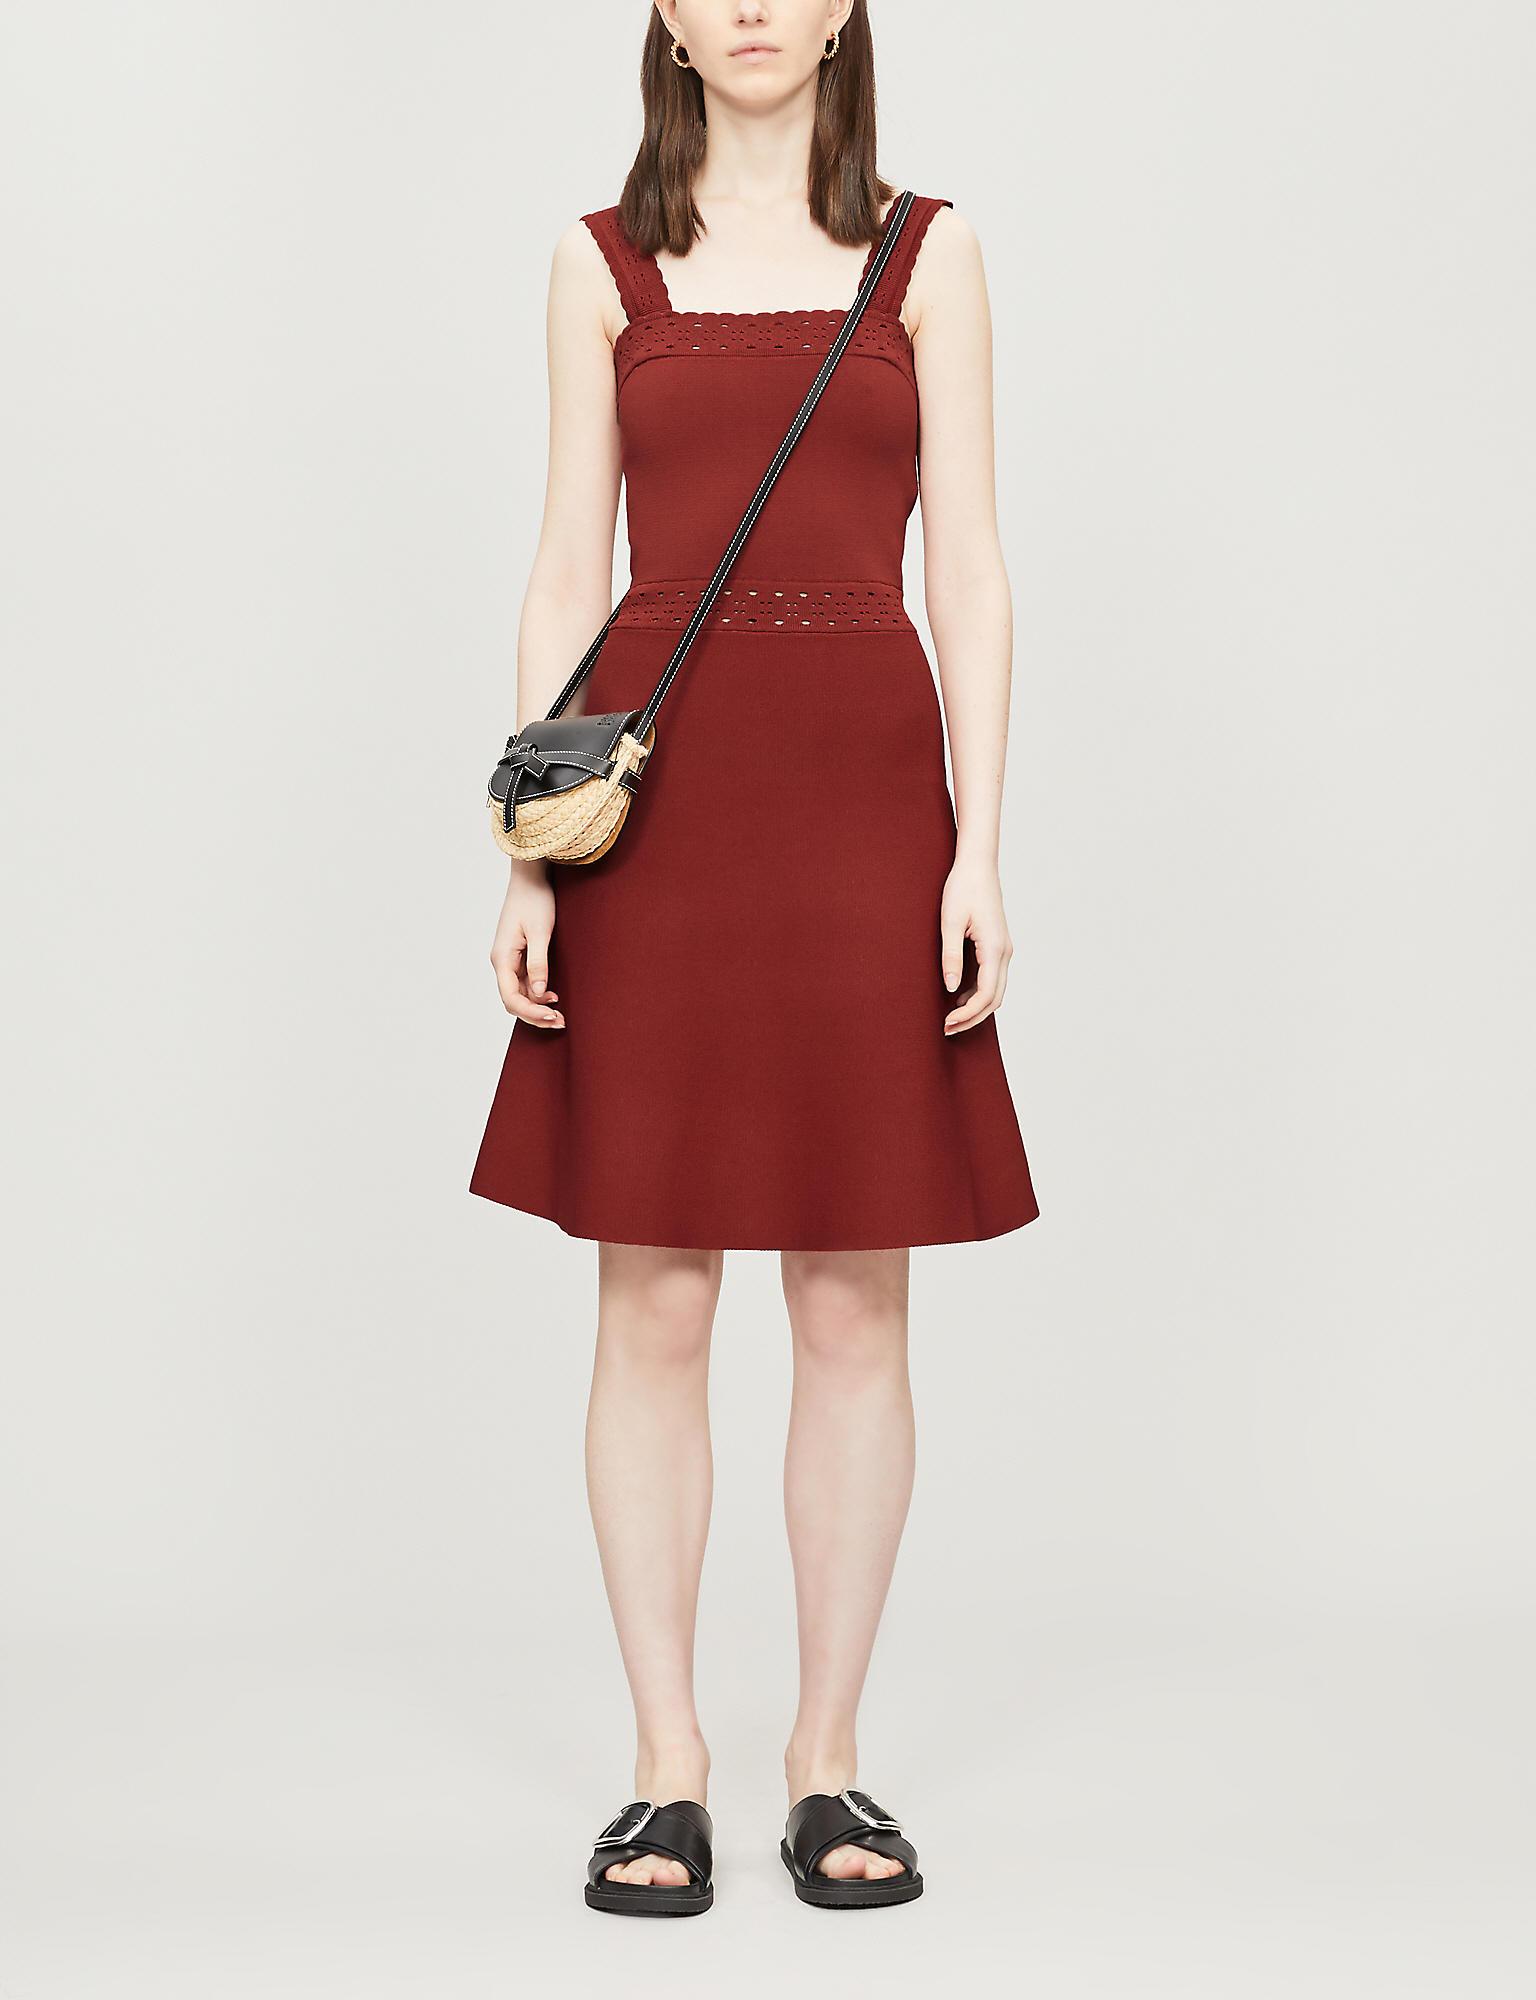 Sandro Synthetic Alyson Sleeveless Stretch-knit Dress in Red - Lyst